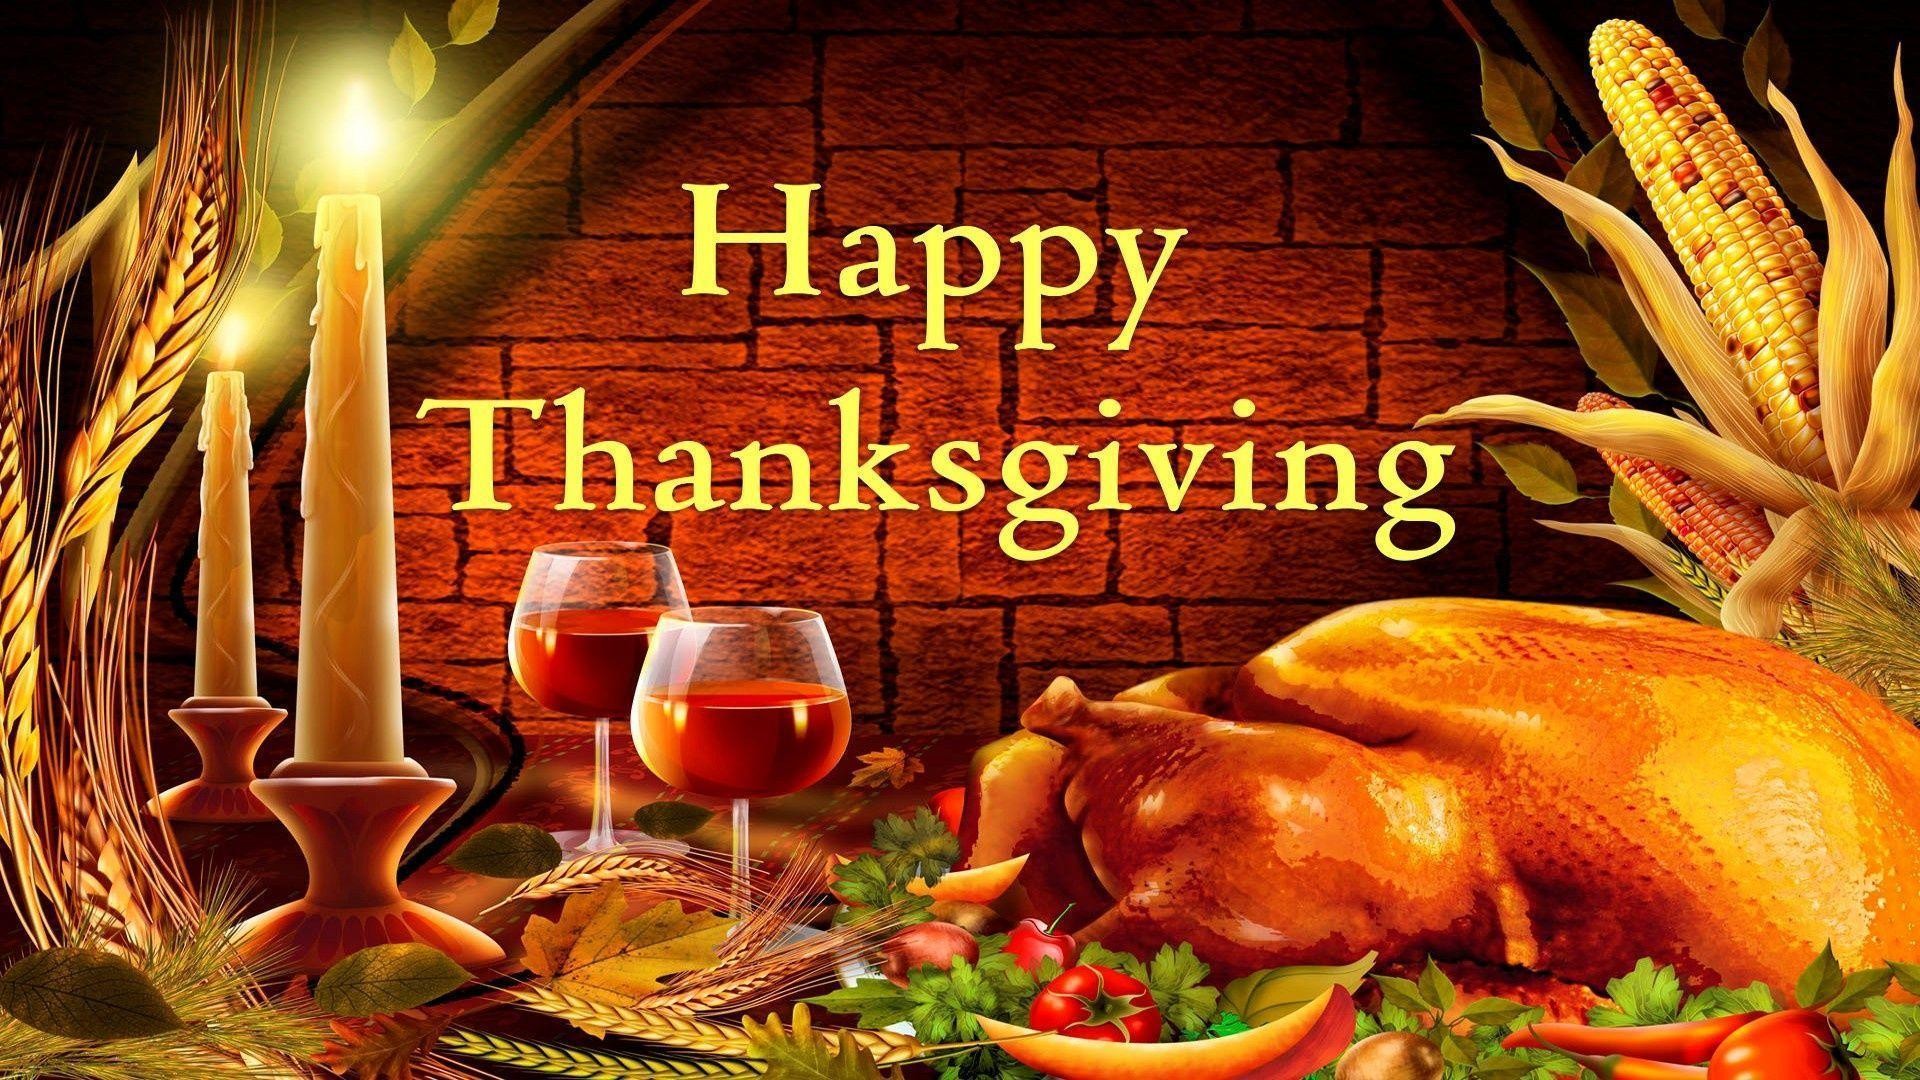 50+ Happy Thanksgiving Images 2022 | Thanksgiving Pictures, Photos